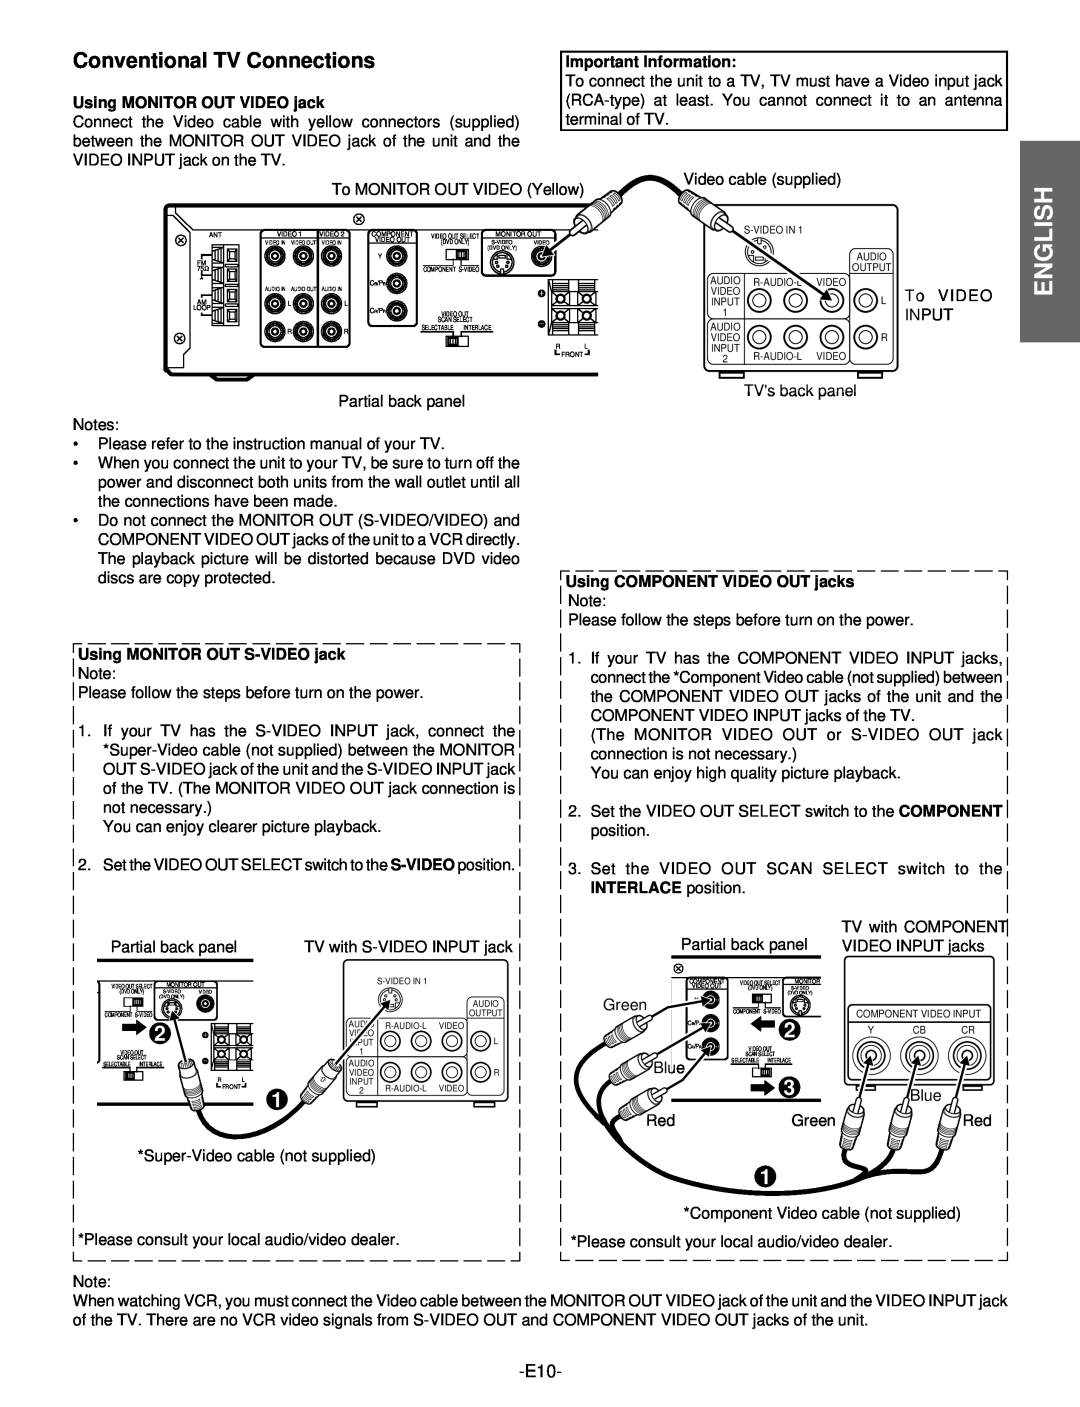 Hitachi DV-S522U Conventional TV Connections, English, Important Information, Using MONITOR OUT VIDEO jack 